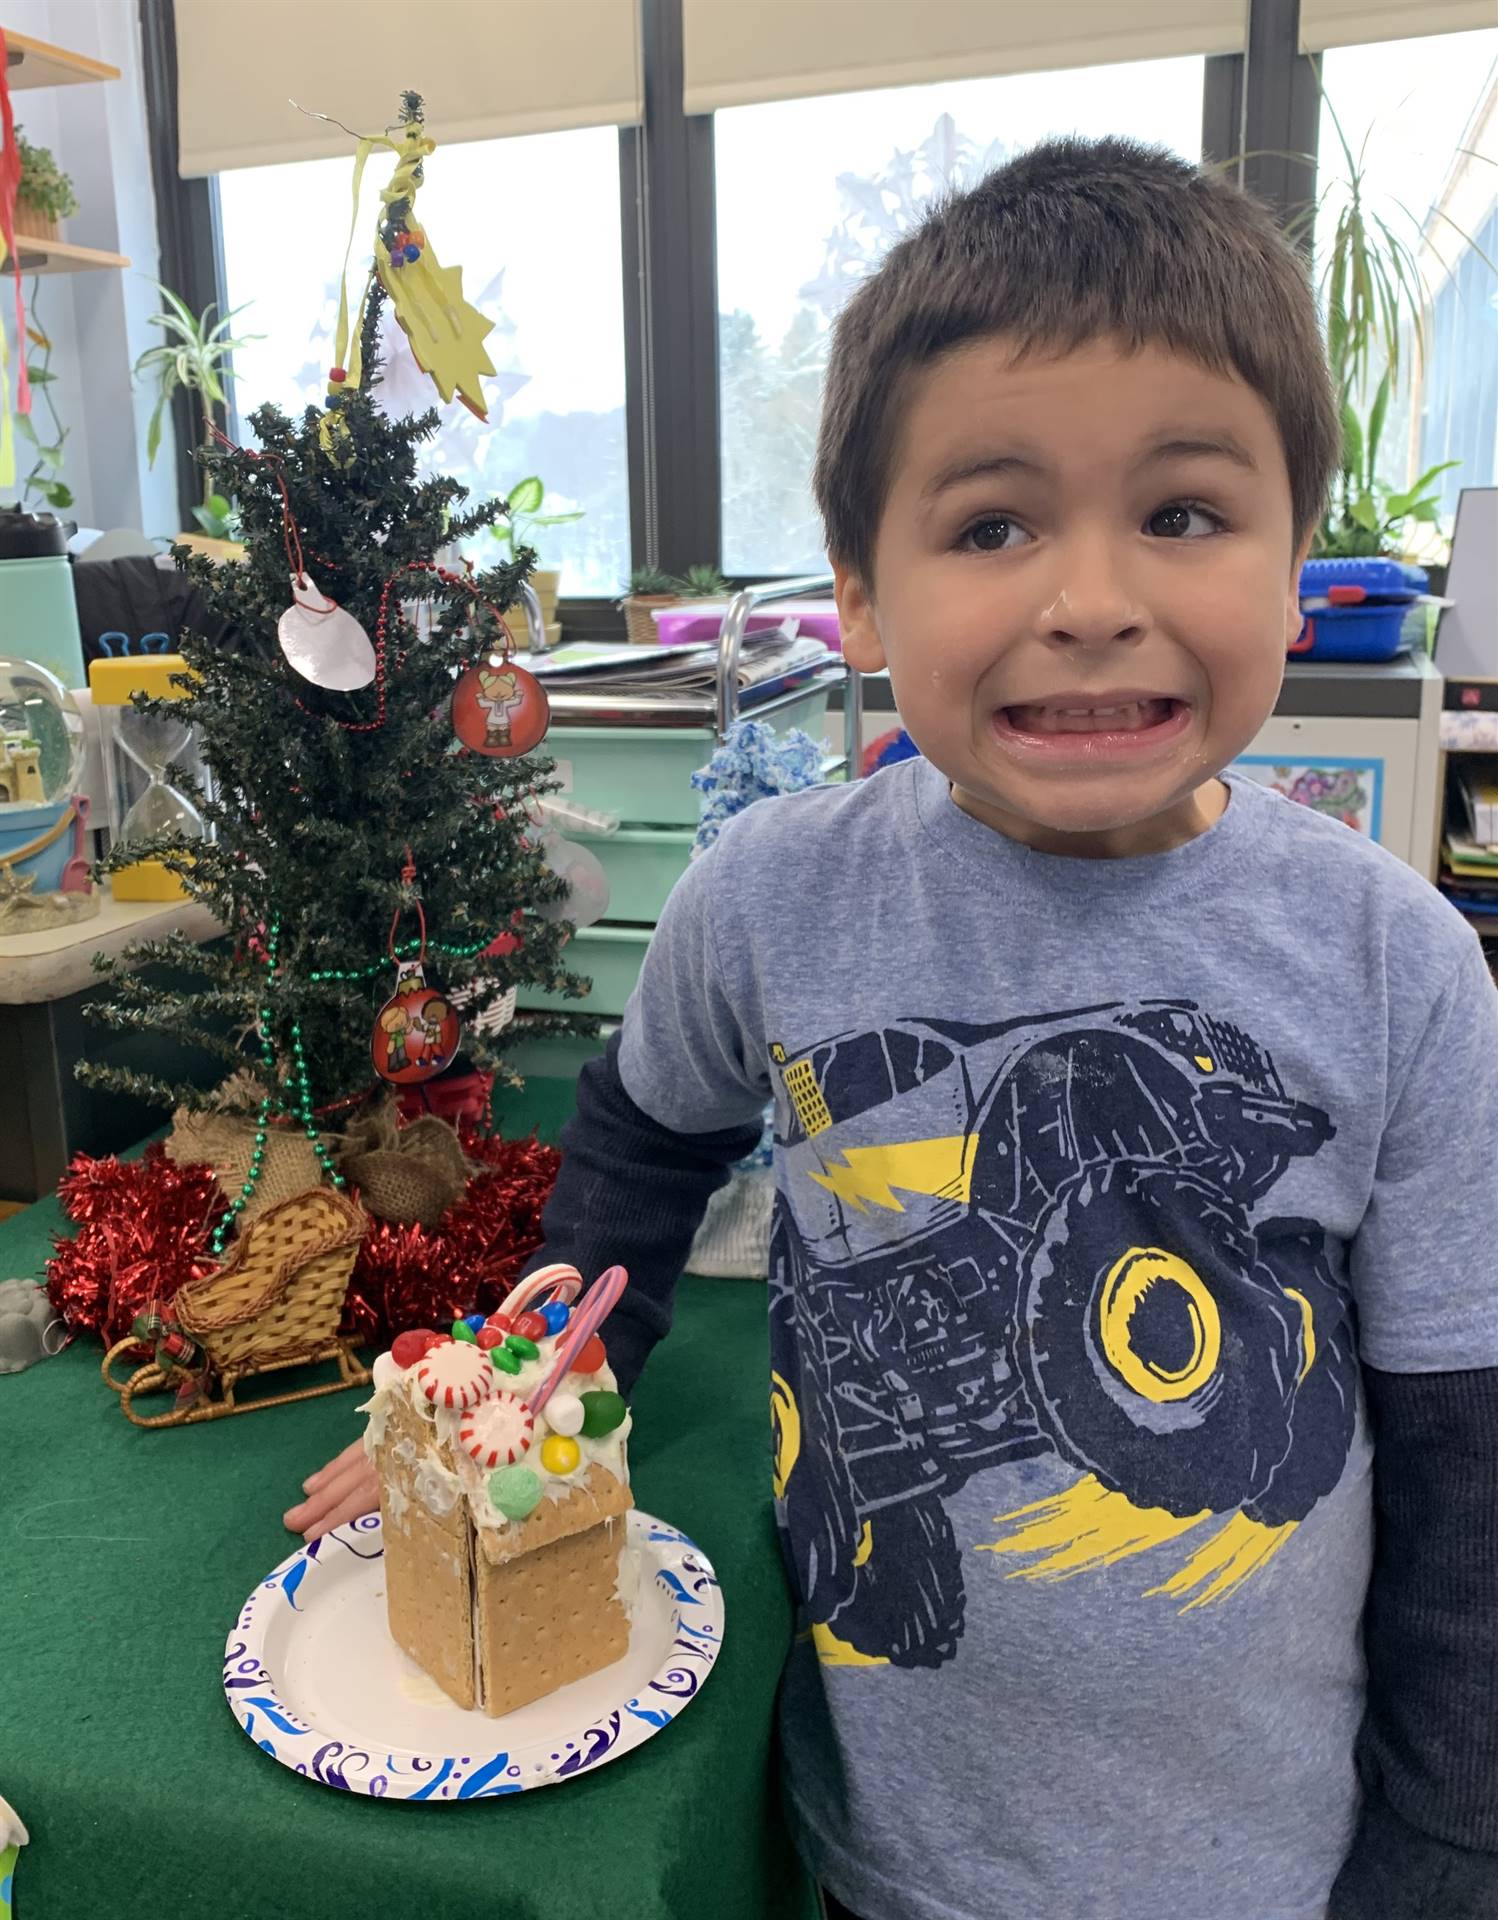 a student standing in front of a decorated tree holding a decorated gingerbread house